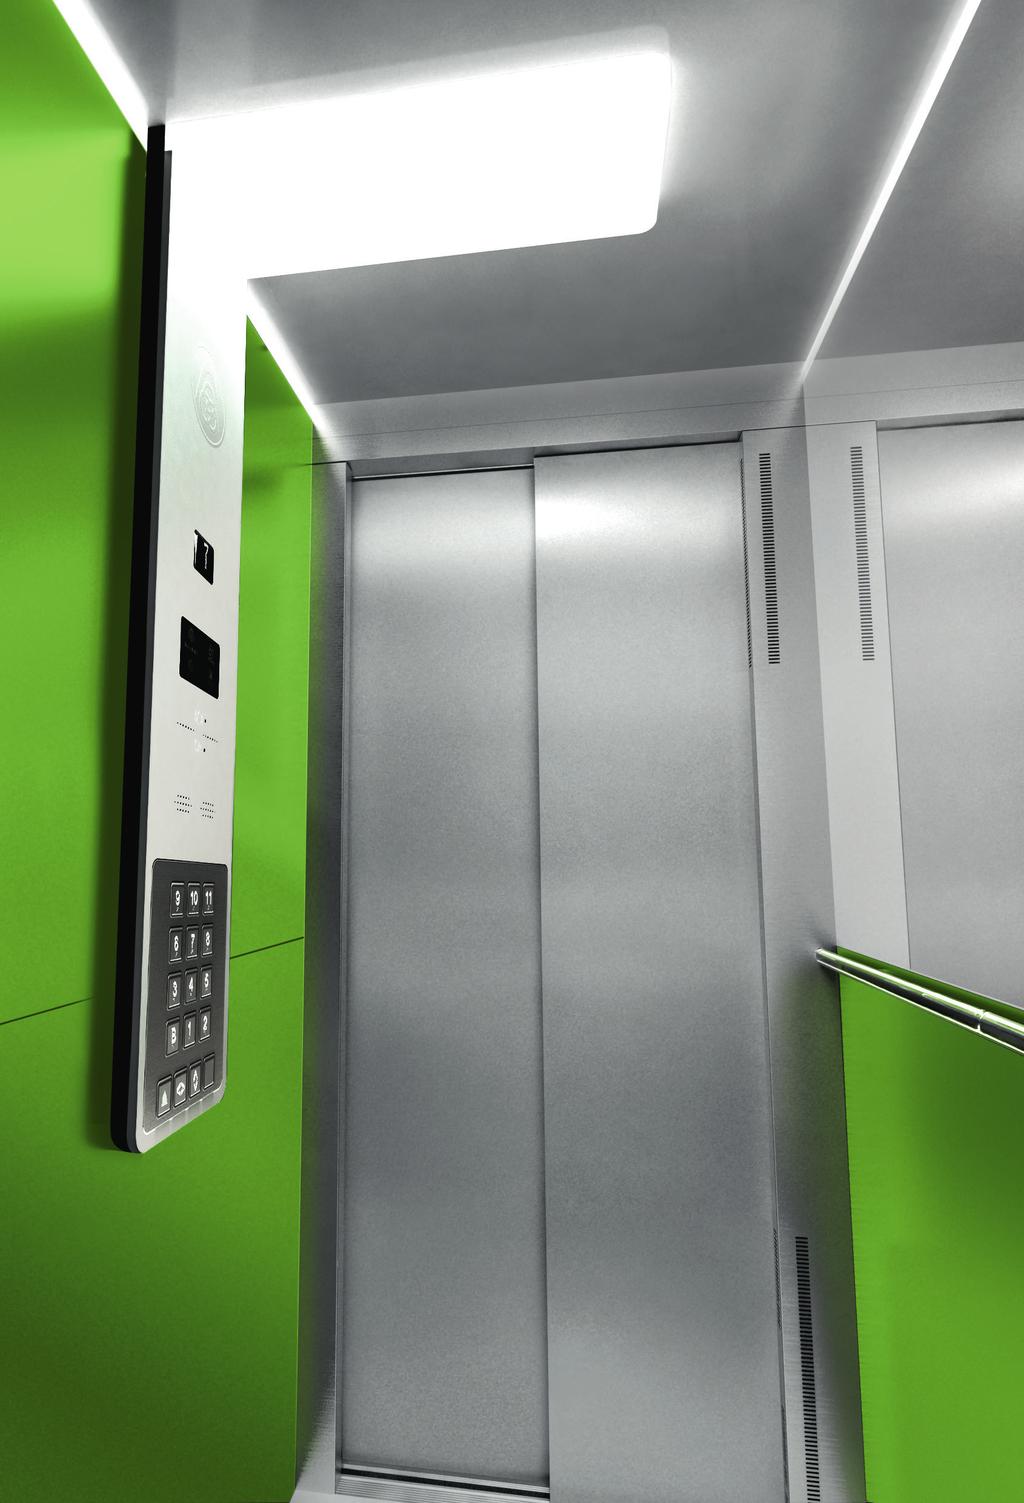 4 5 A new generation of elevators. And your new way to impress.